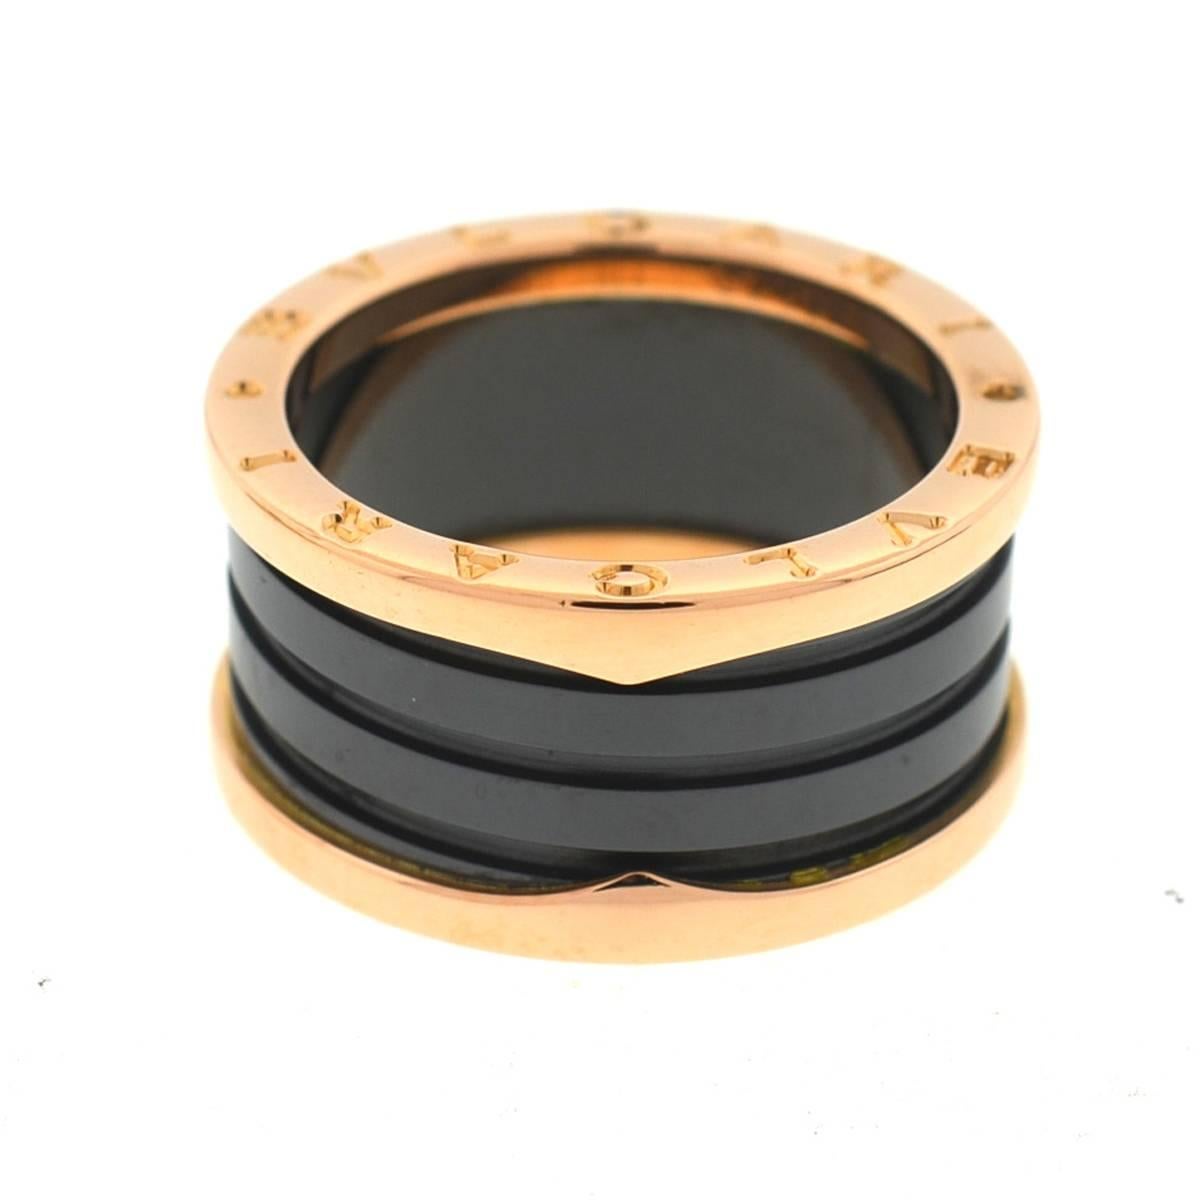 Company - Bvlgari
Style - B.Zero1
Metal - 18k Rose Gold and Black Ceramic
Size - 9
Width - 12mm
Includes - Ring only
8128-2ume